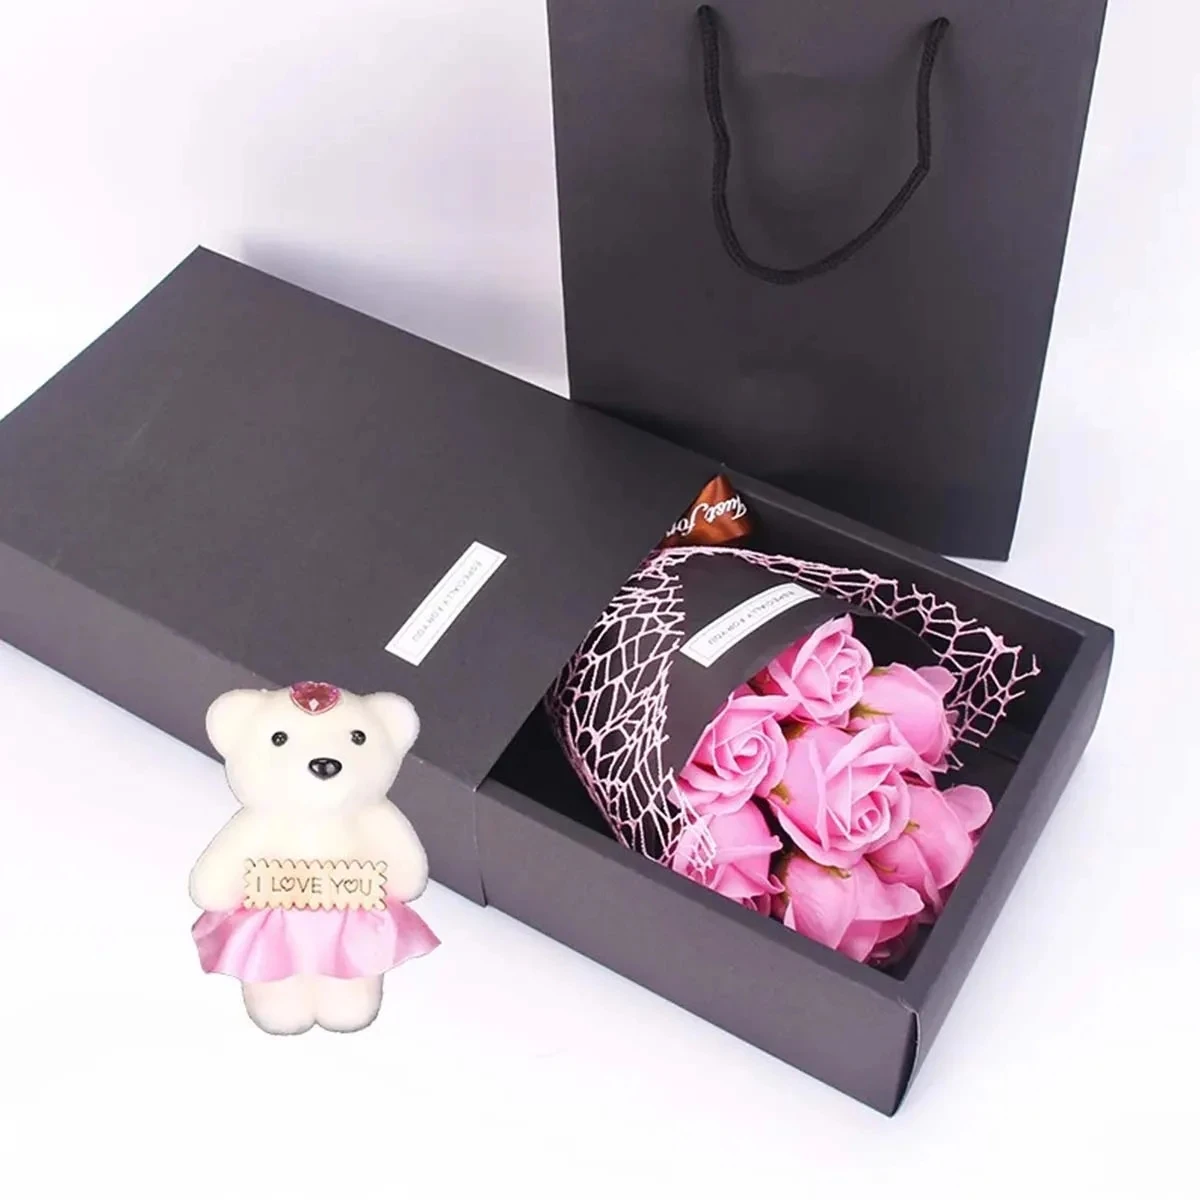 S6b1cab6ef76c4eb1a6807a664452ba845 Valentine's Day Artificial Flowers 7 Rose Soap Bouquet Gift Box Teddy Bear Flower Creative Mother's Day Birthday Gift Home Decor